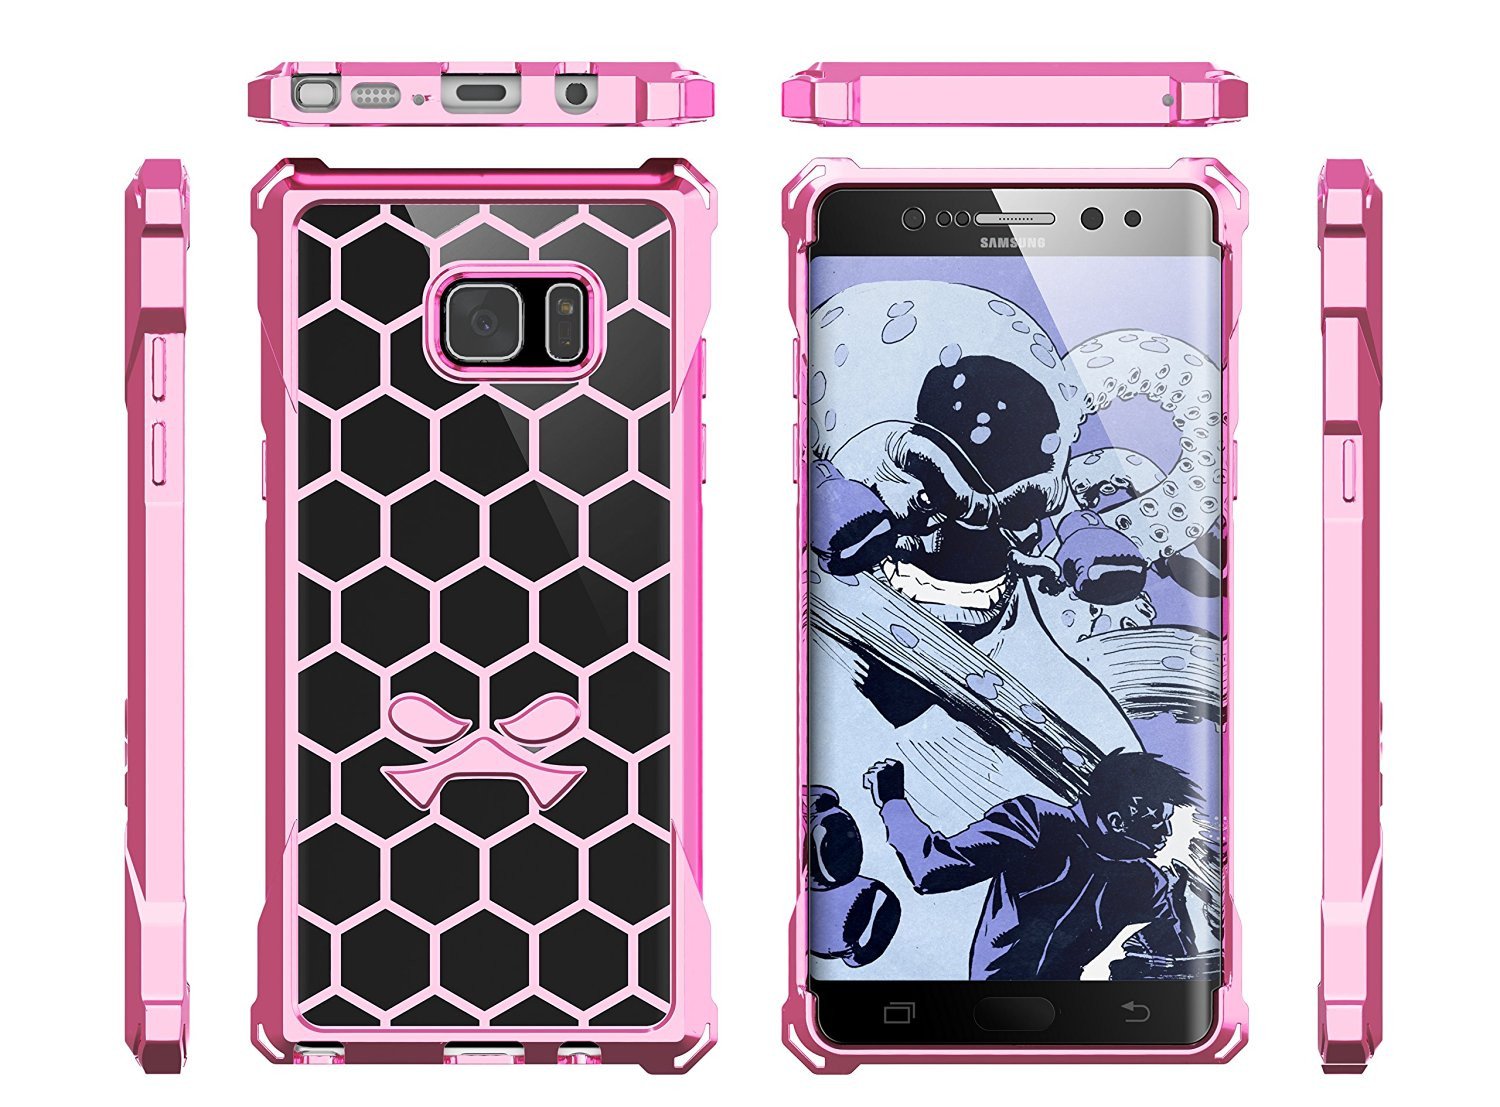 Note 7 Case, Ghostek® Covert Series Rose Pink w/ Explosion-Proof Screen Protector | Ultra Fit